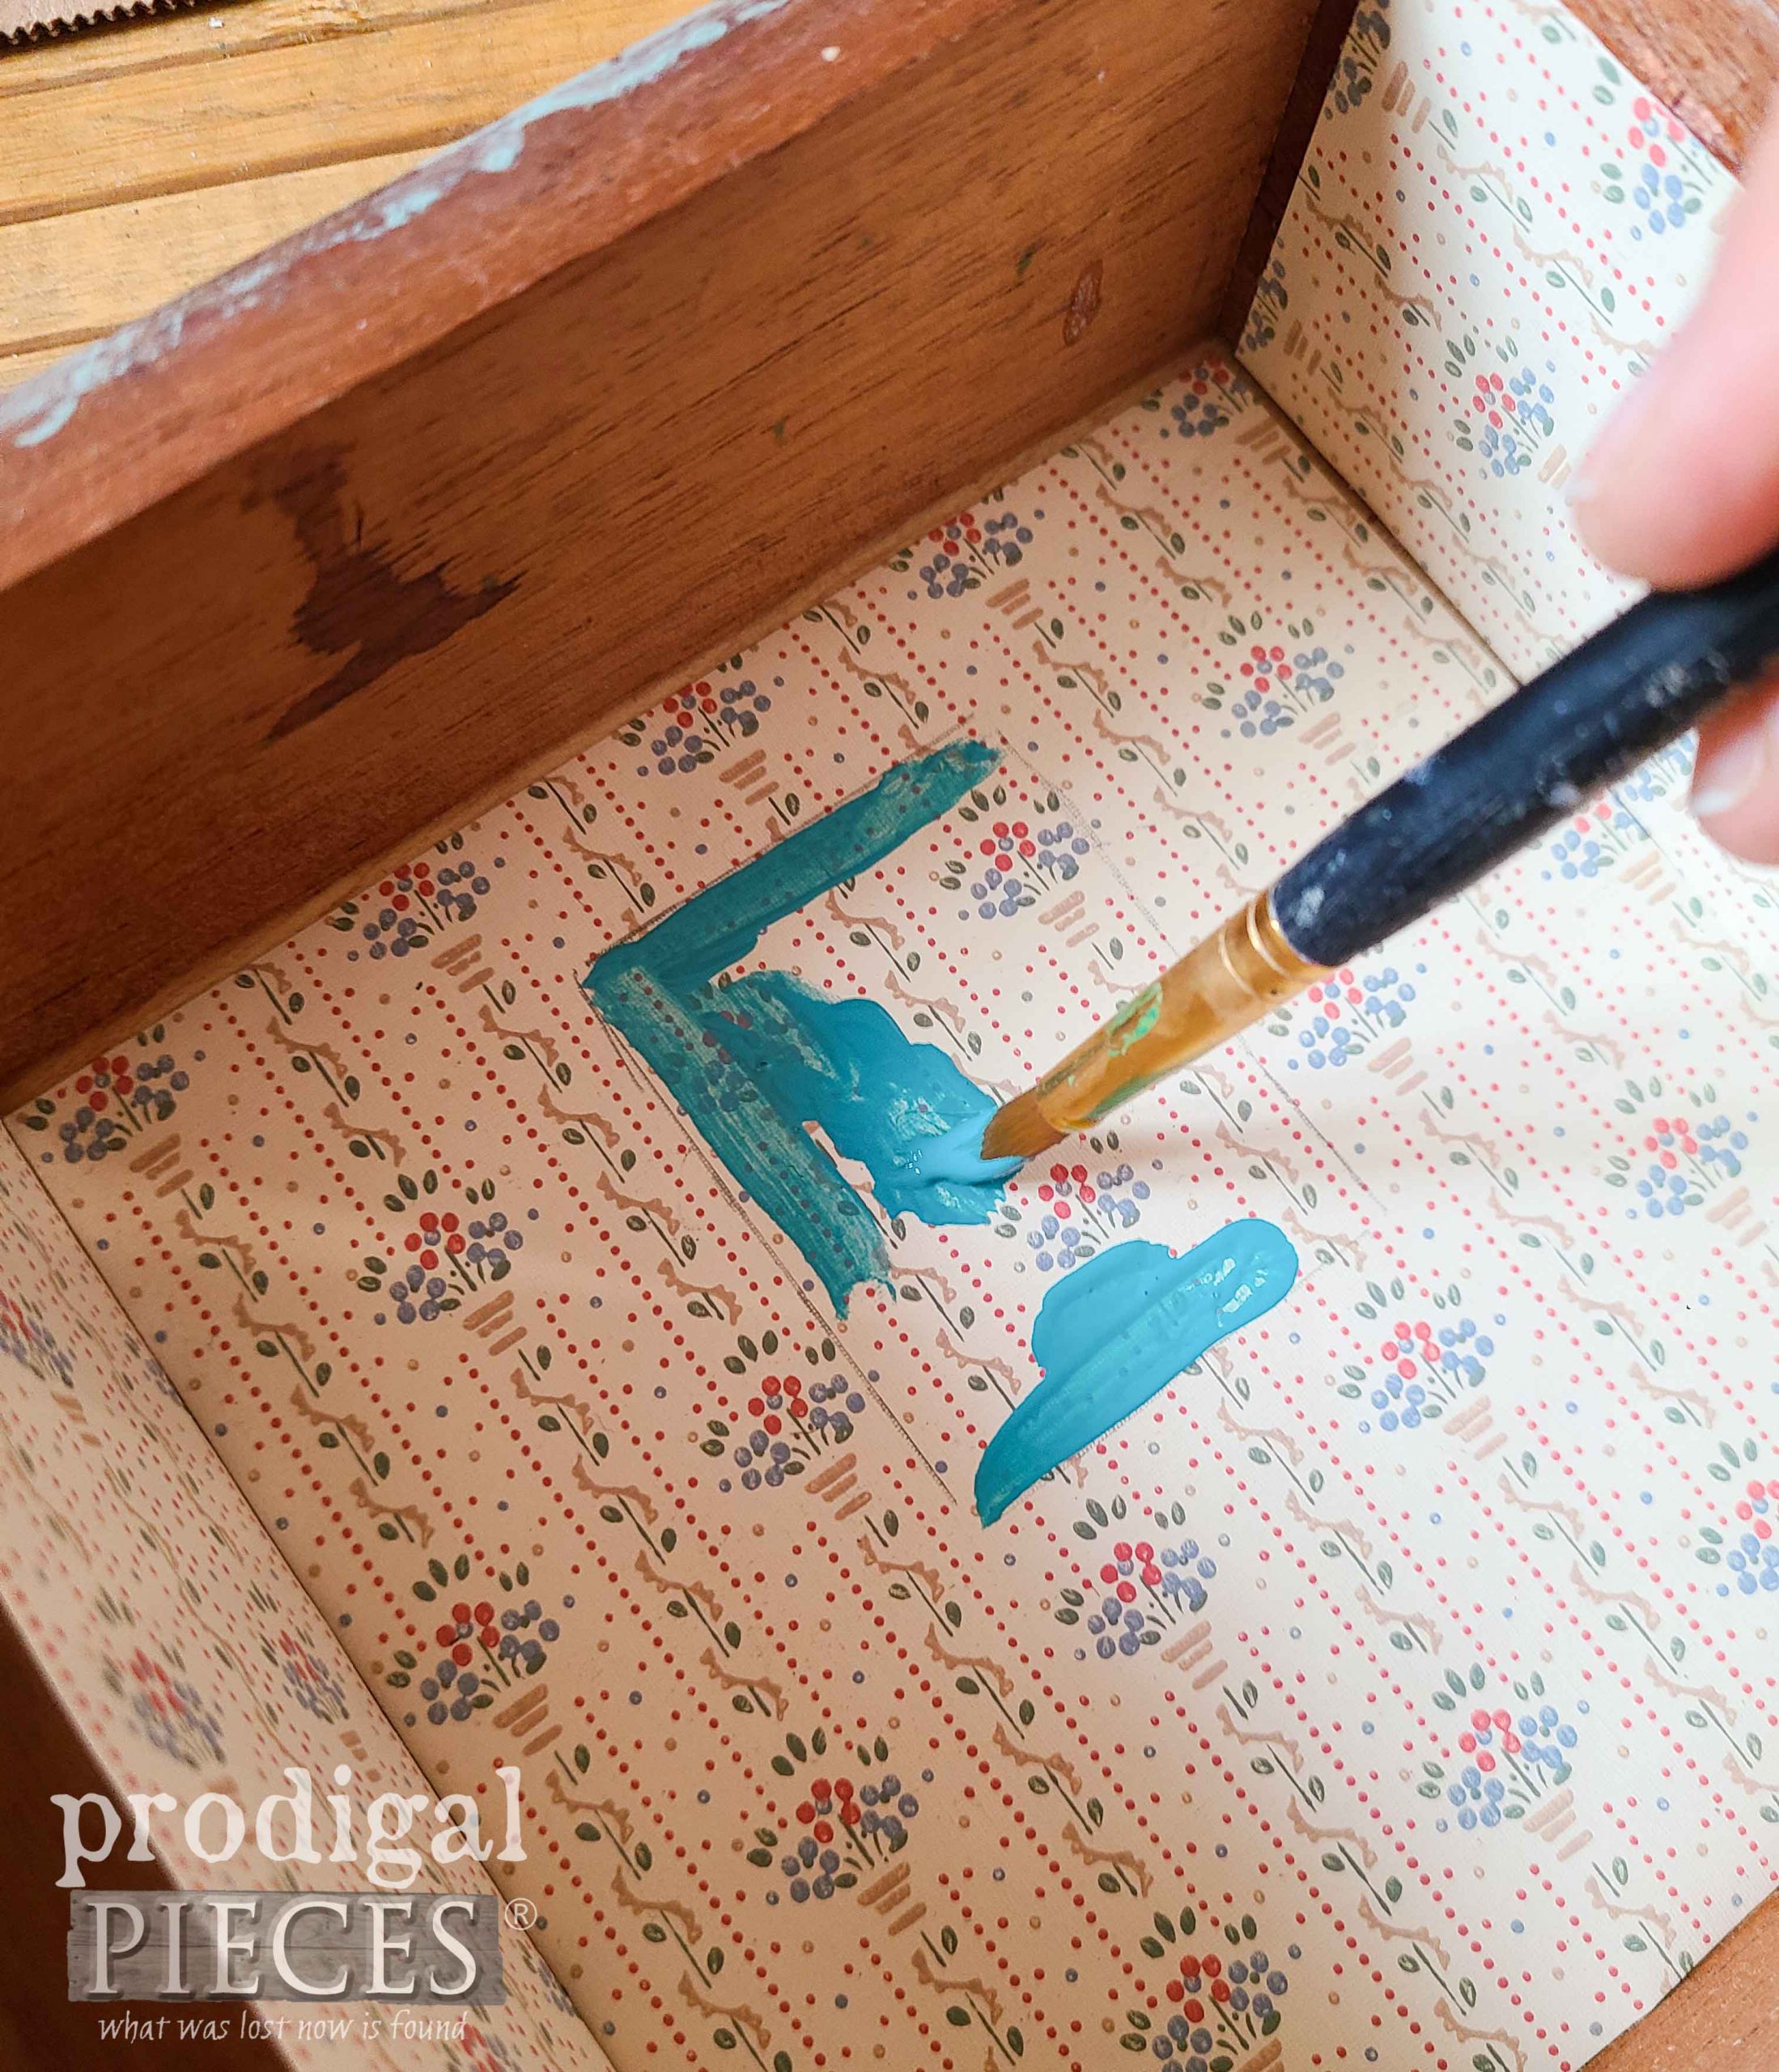 Painting Inside Travel Dollhouse from Upcycled Cigar Box | prodigalpieces.com #prodigalpieces 